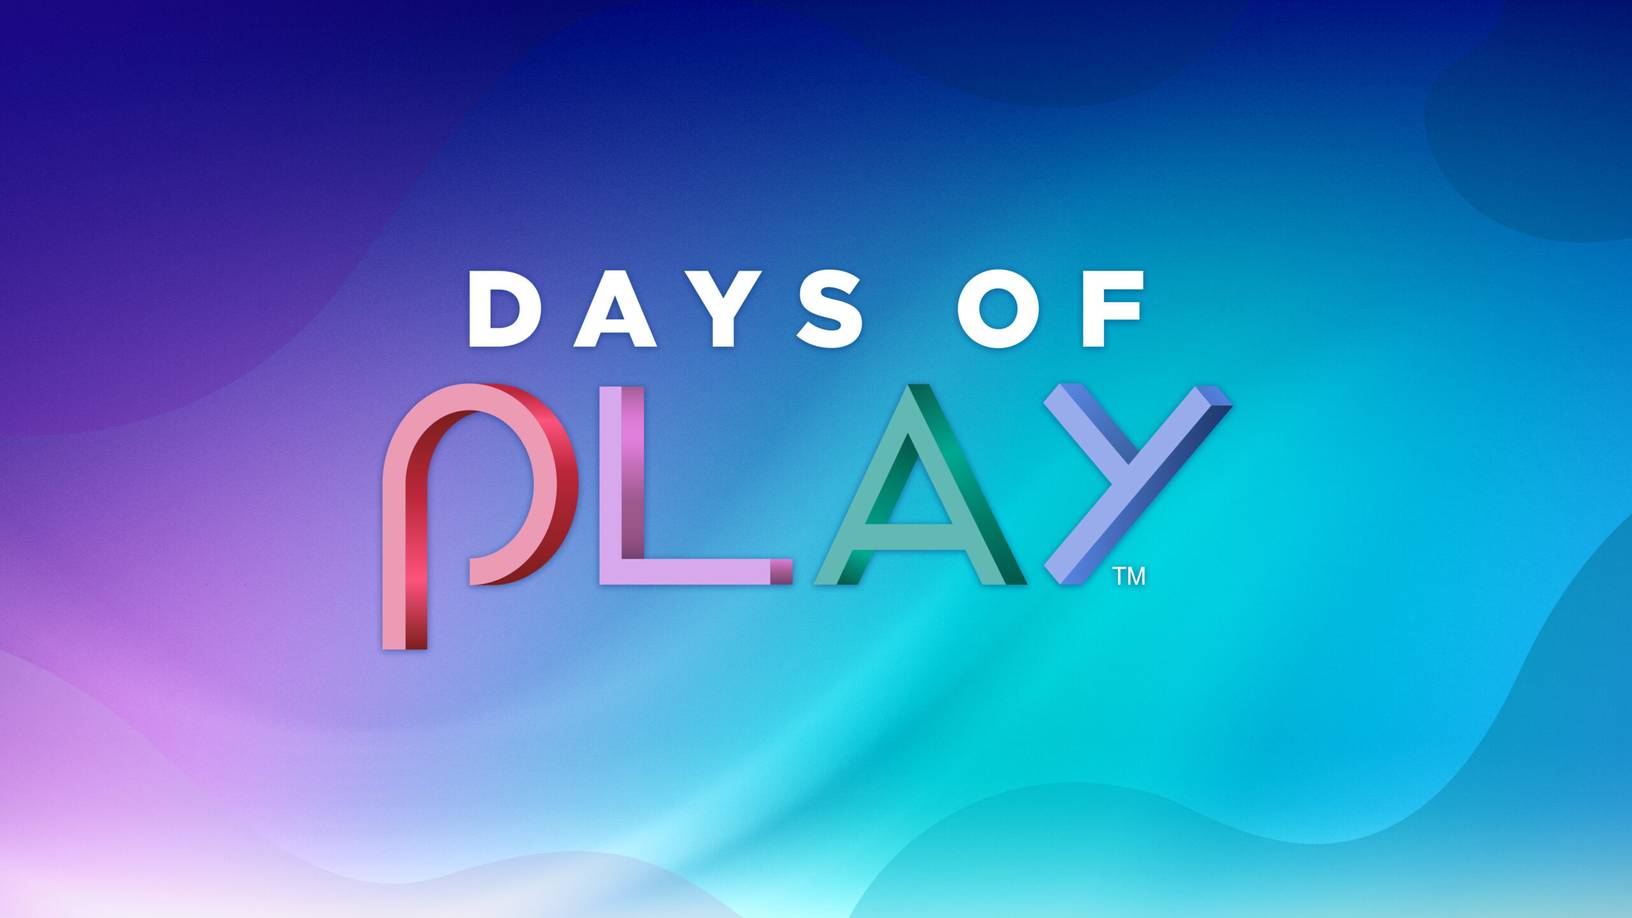 Image for PlayStation's Days of Play 2022 sale is now on